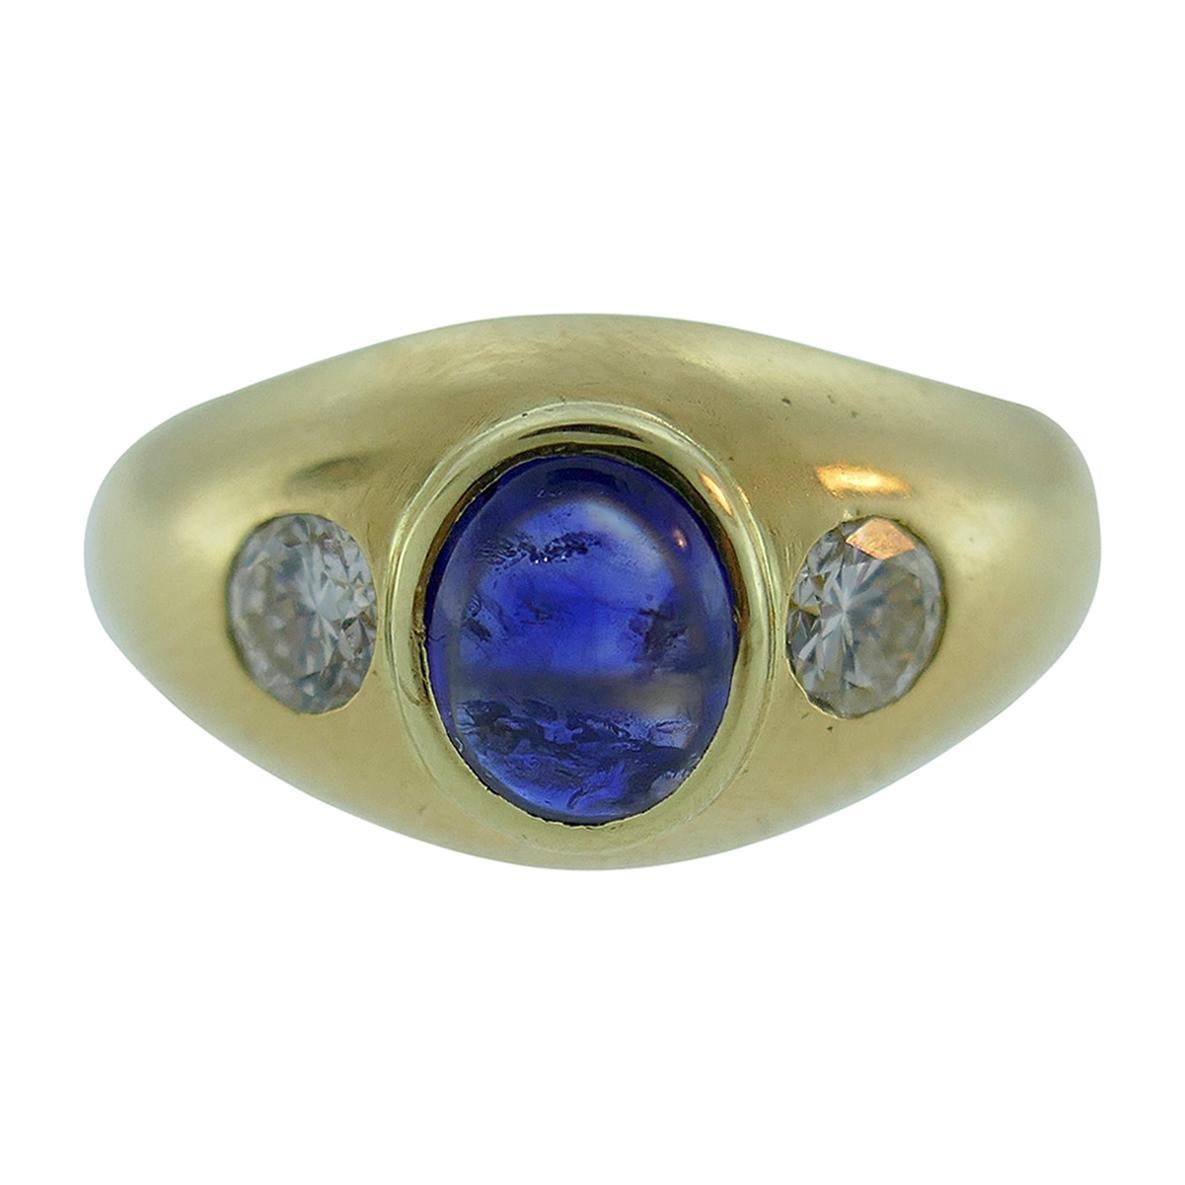 Cartier Paris 18k Yellow Gold, Cabochon Sapphire and Diamond Gypsy Ring Vintage